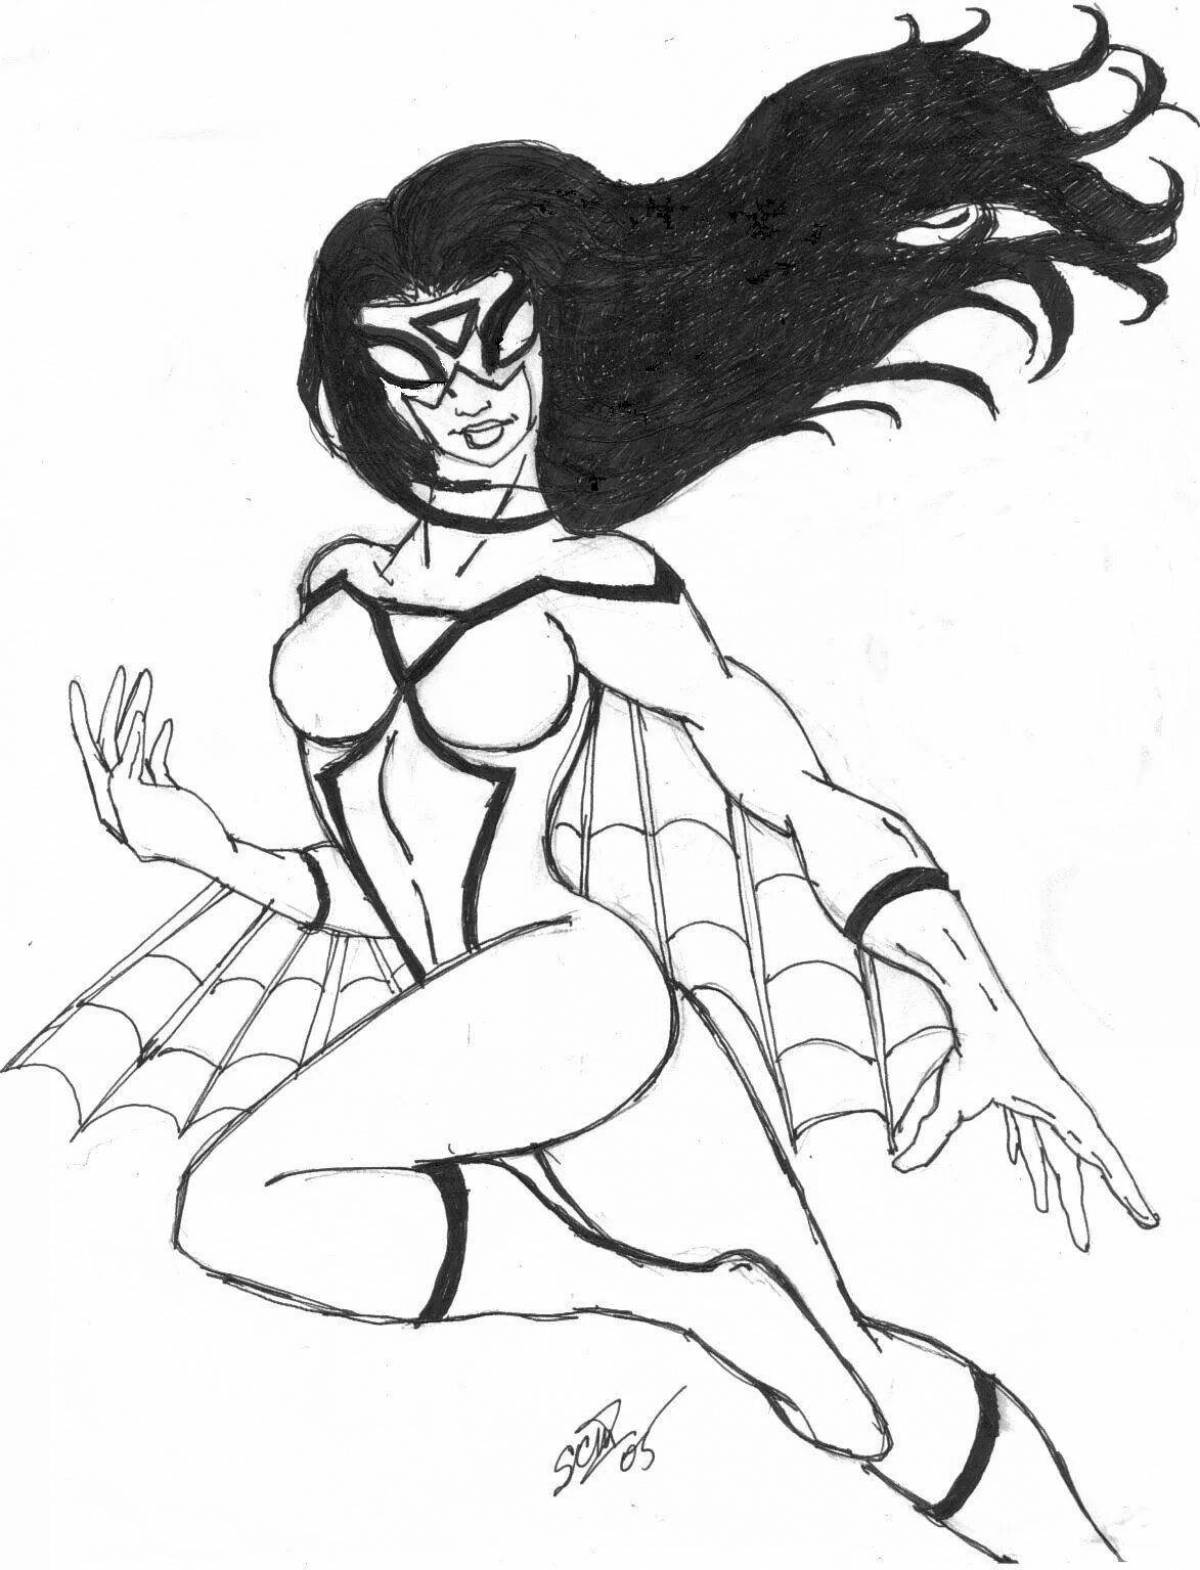 Coloring page charming spider girl